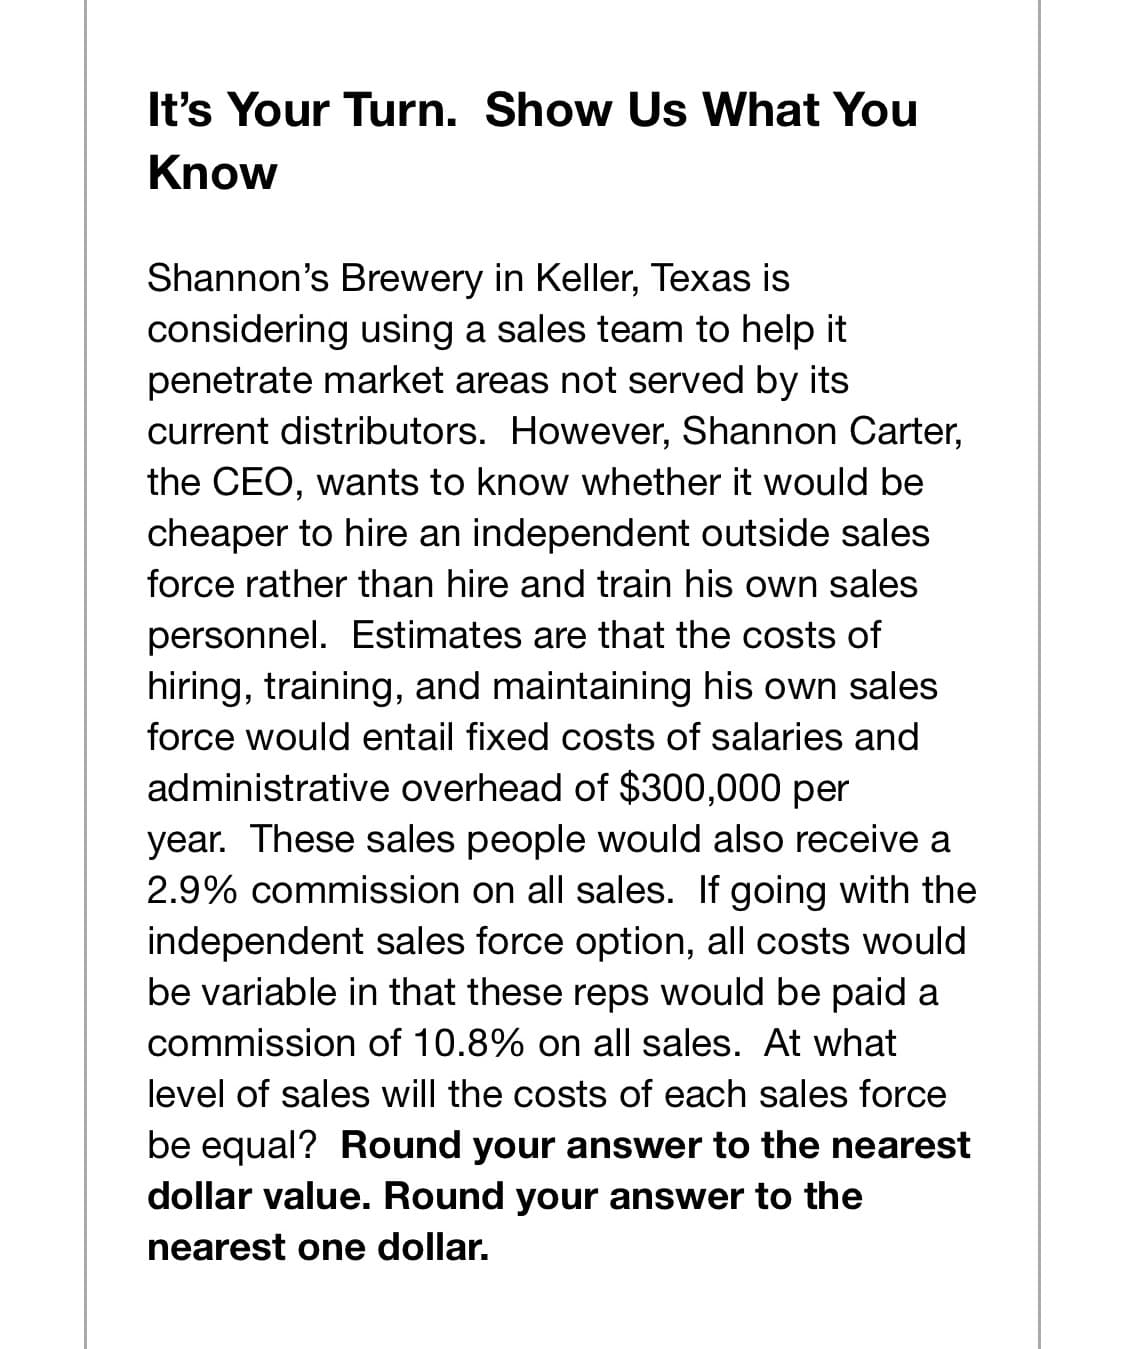 It's Your Turn. Show Us What You
Know
Shannon's Brewery in Keller, Texas is
considering using a sales team to help it
penetrate market areas not served by its
current distributors. However, Shannon Carter,
the CEO, wants to know whether it would be
cheaper to hire an independent outside sales
force rather than hire and train his own sales
personnel. Estimates are that the costs of
hiring, training, and maintaining his own sales
force would entail fixed costs of salaries and
administrative overhead of $300,000 per
year. These sales people would also receive a
2.9% commission on all sales. If going with the
independent sales force option, all costs would
be variable in that these reps would be paid a
commission of 10.8% on all sales. At what
level of sales will the costs of each sales force
be equal? Round your answer to the nearest
dollar value. Round your answer to the
nearest one dollar.
